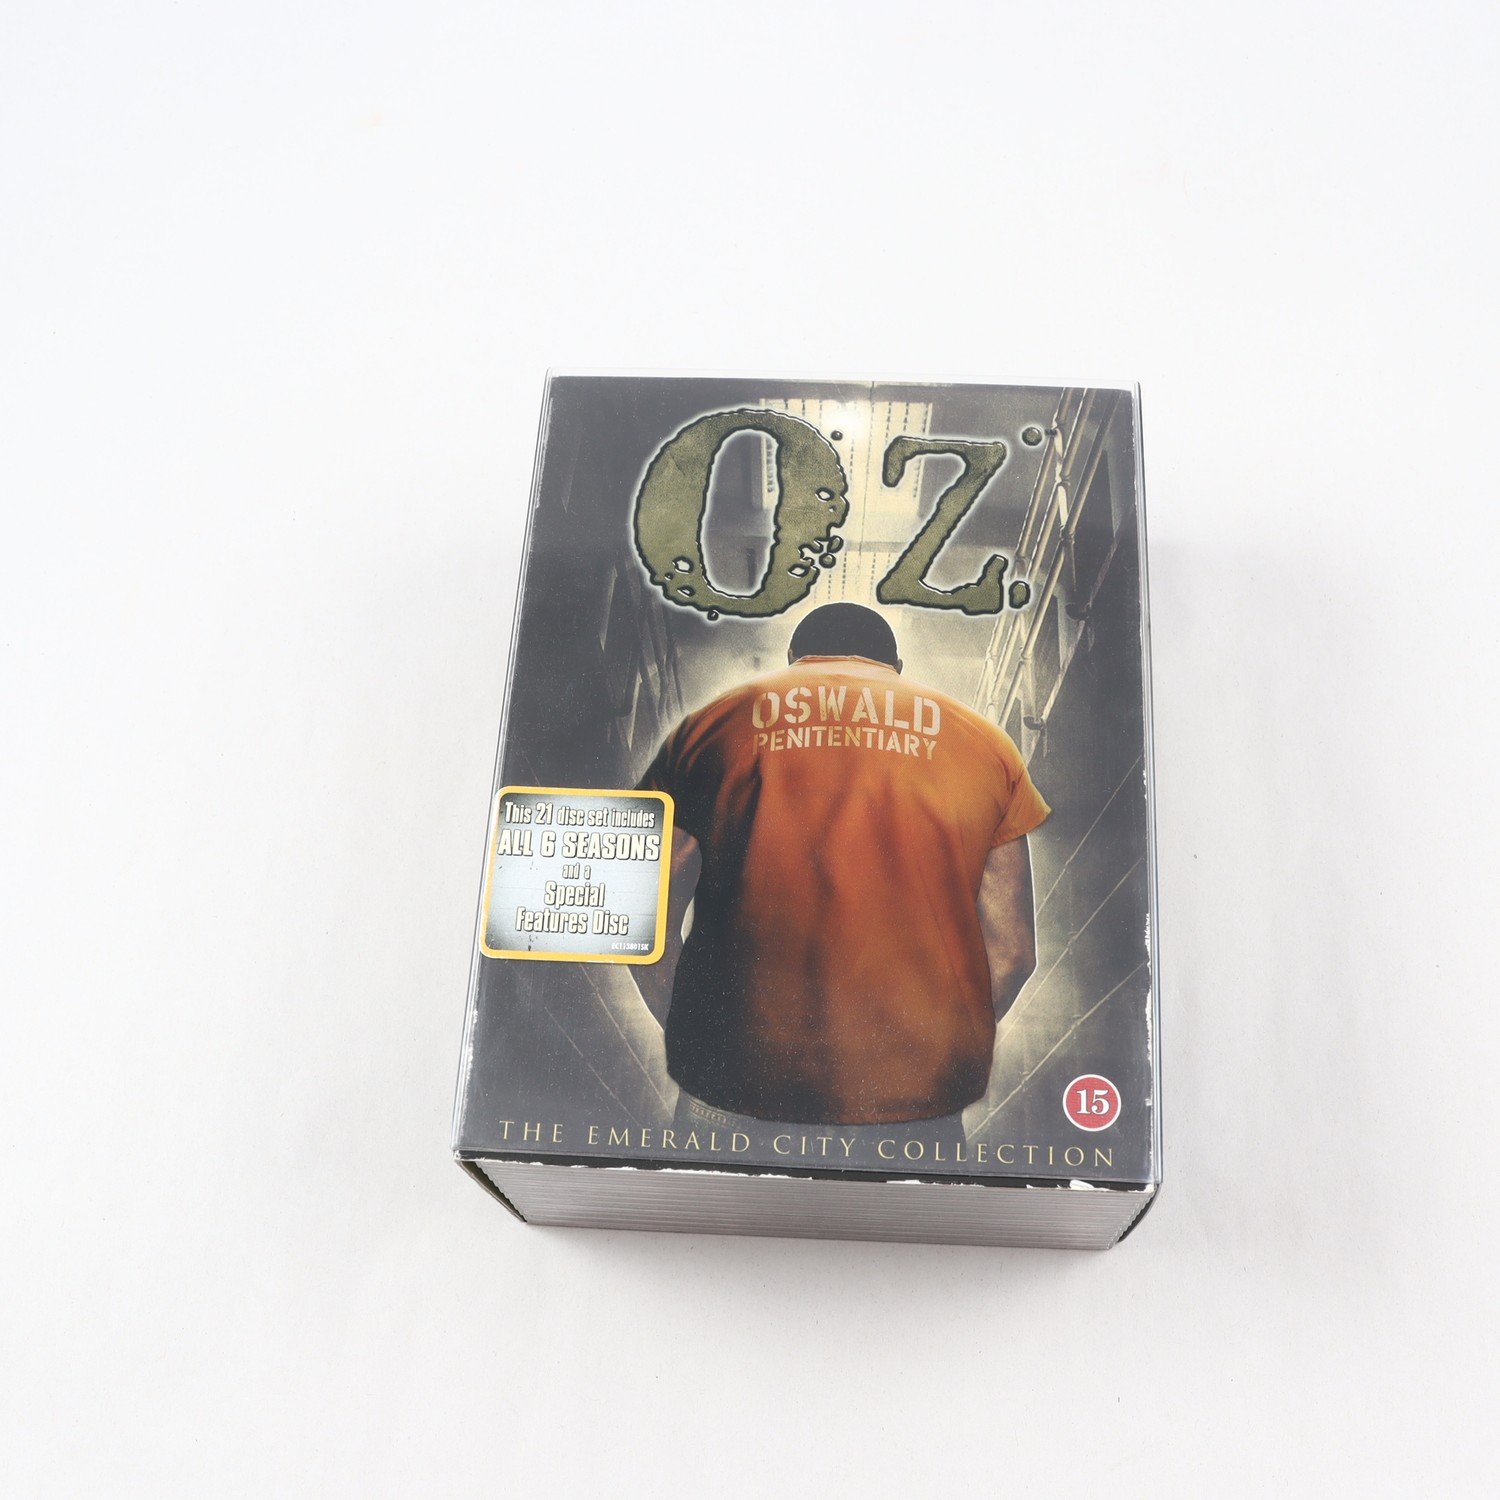 DVD OZ, The Emerald City Collection